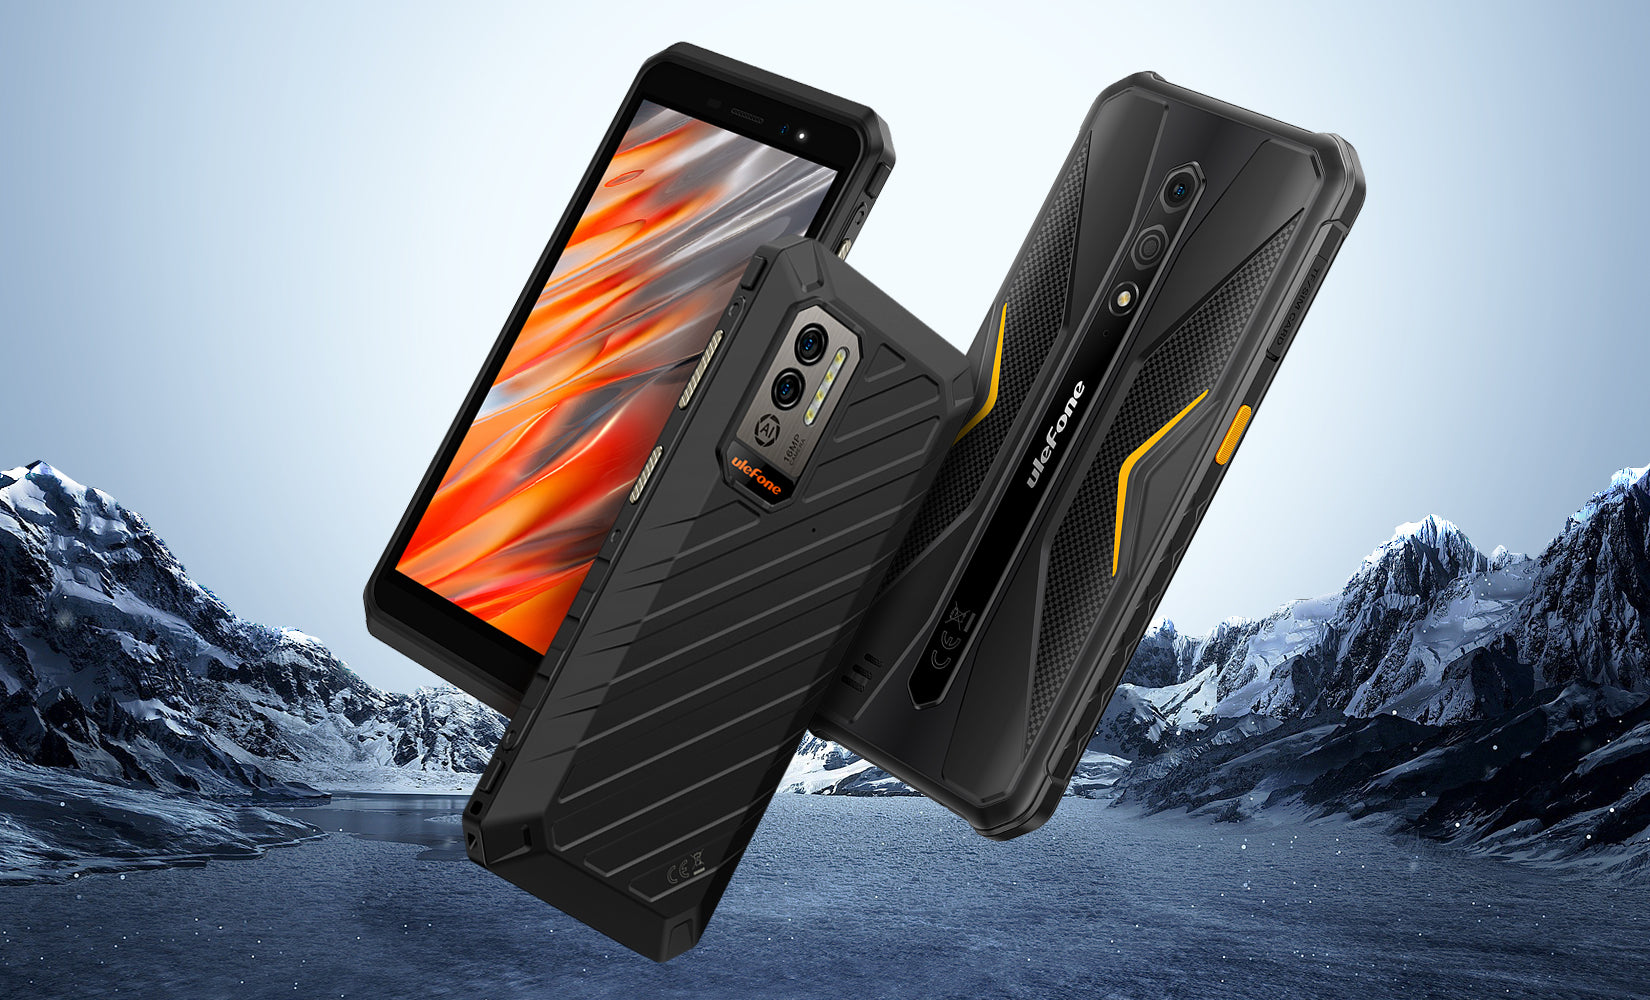 The Armor X series presents affordable mid-class rugged smartphones with strong performance and a smooth system designed to thrive in challenging environments.